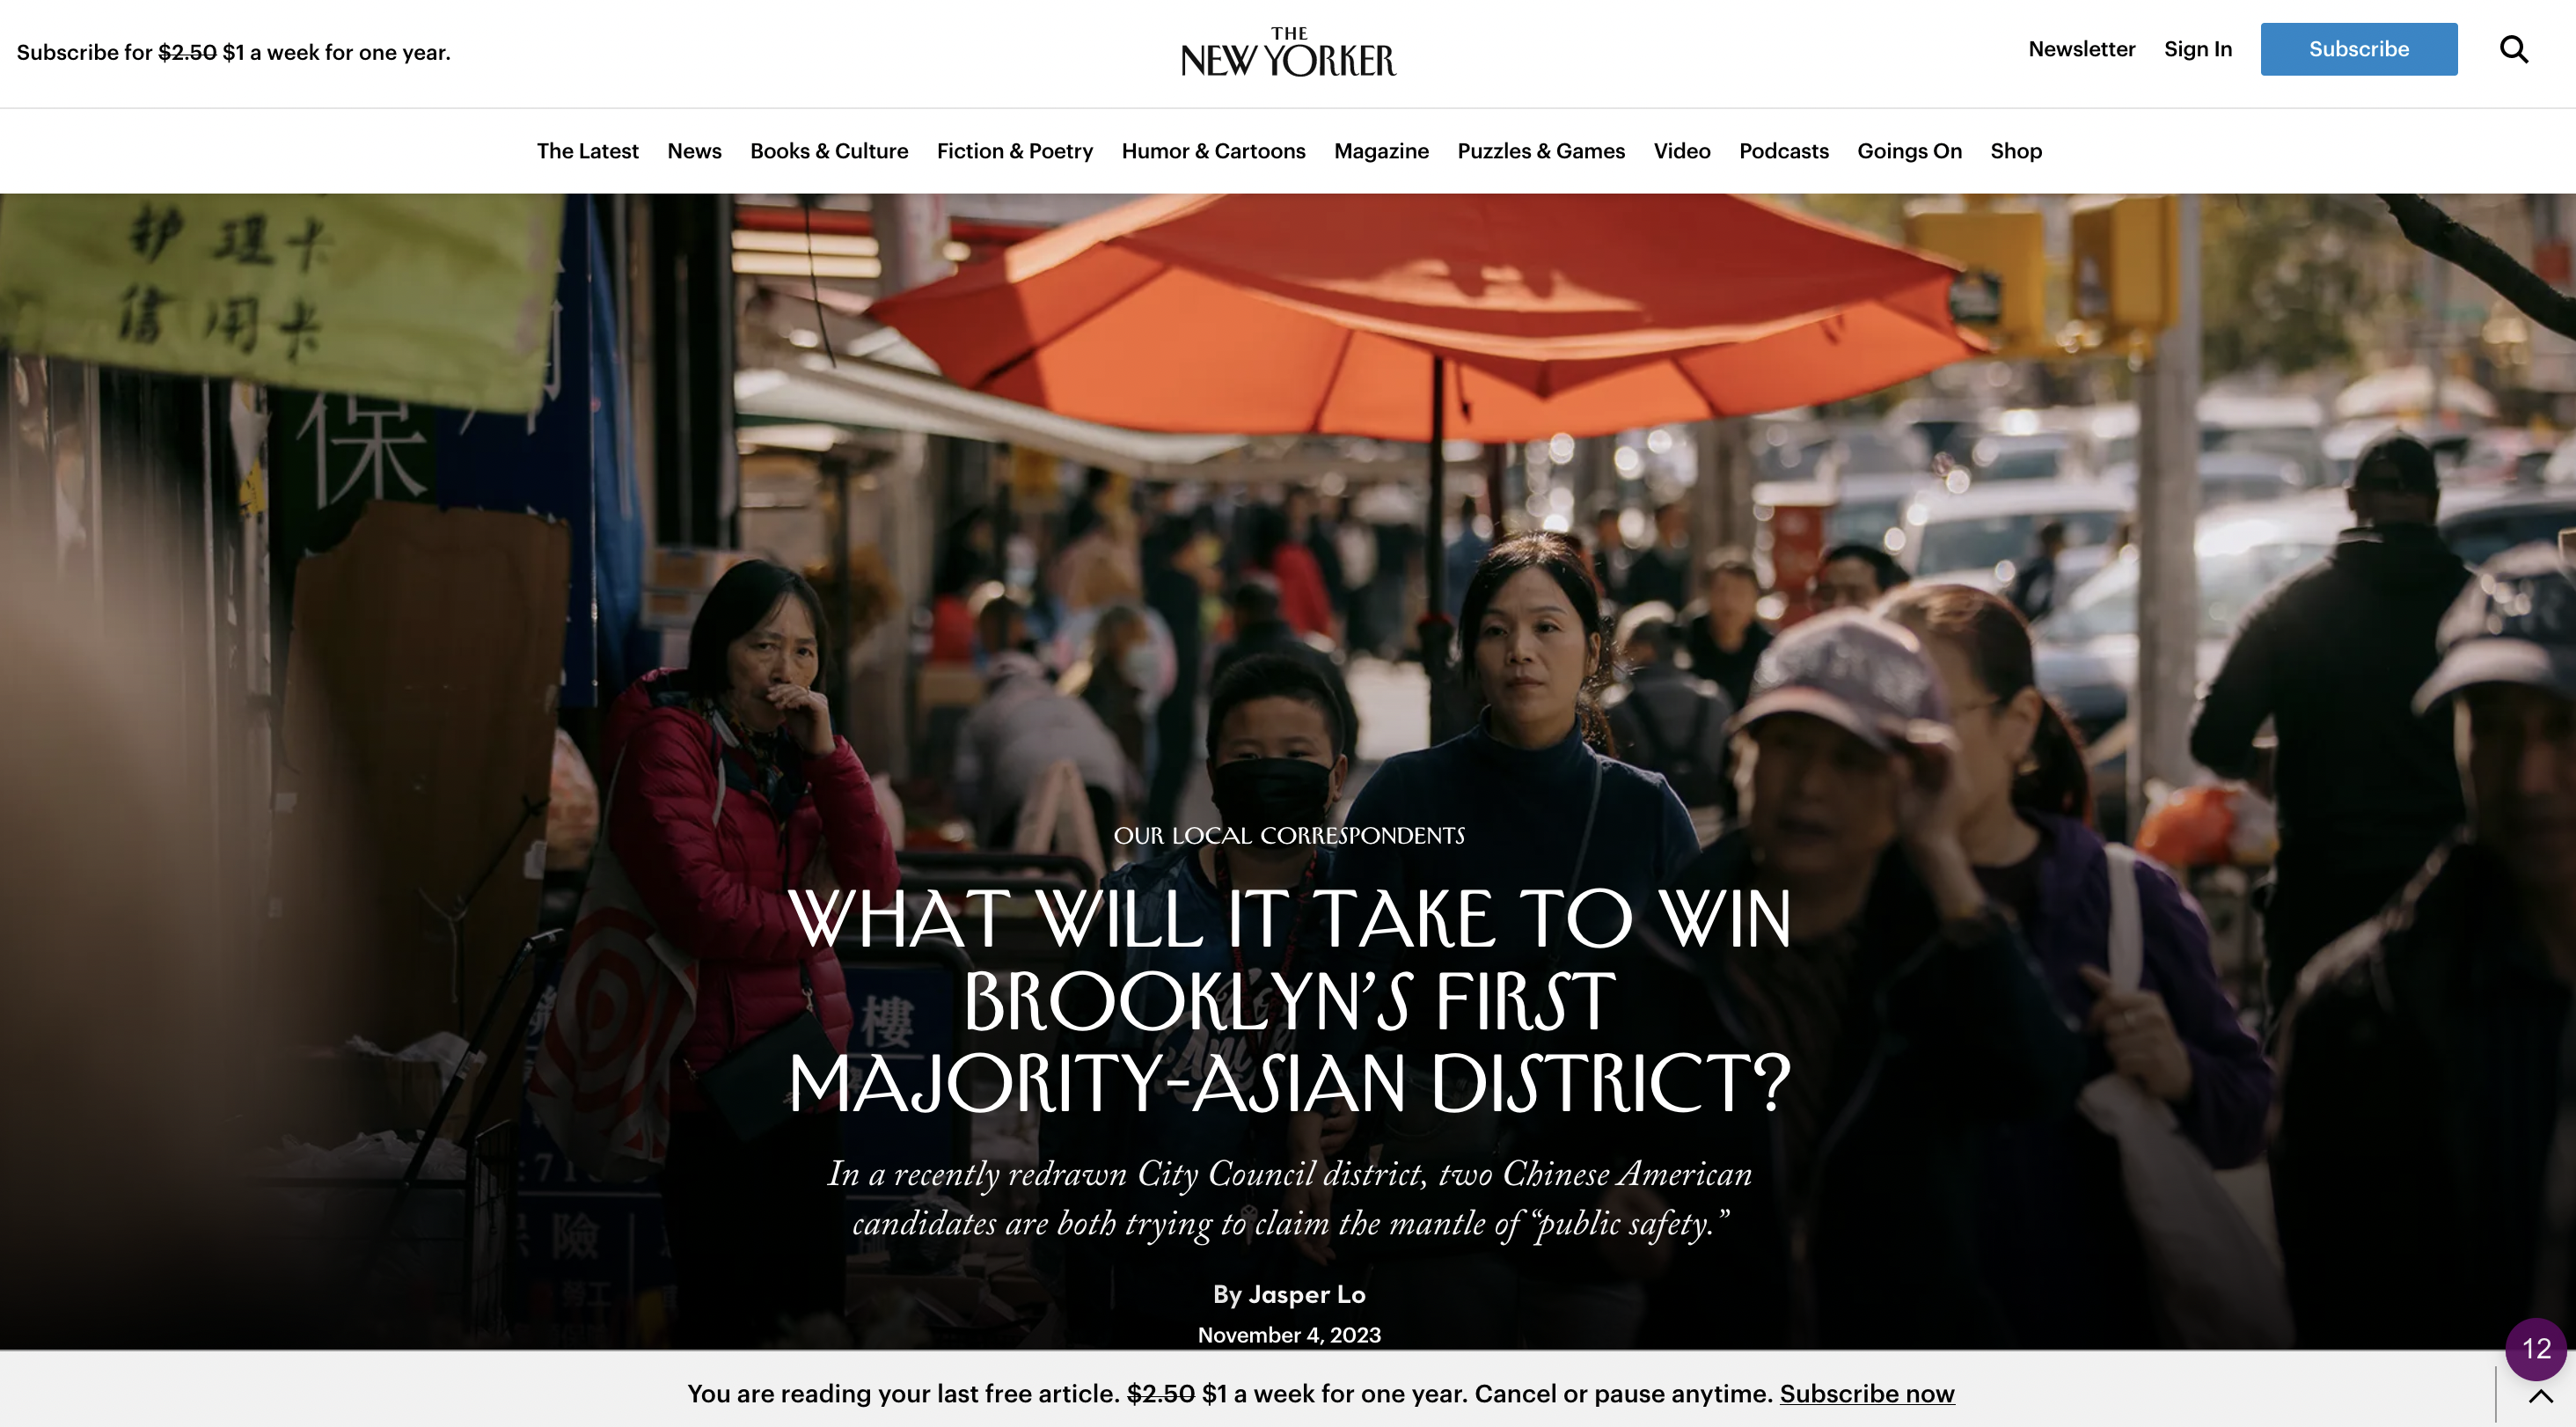 for The New Yorker: What Will It Take to Win Brooklyn’s First Majority-Asian District?